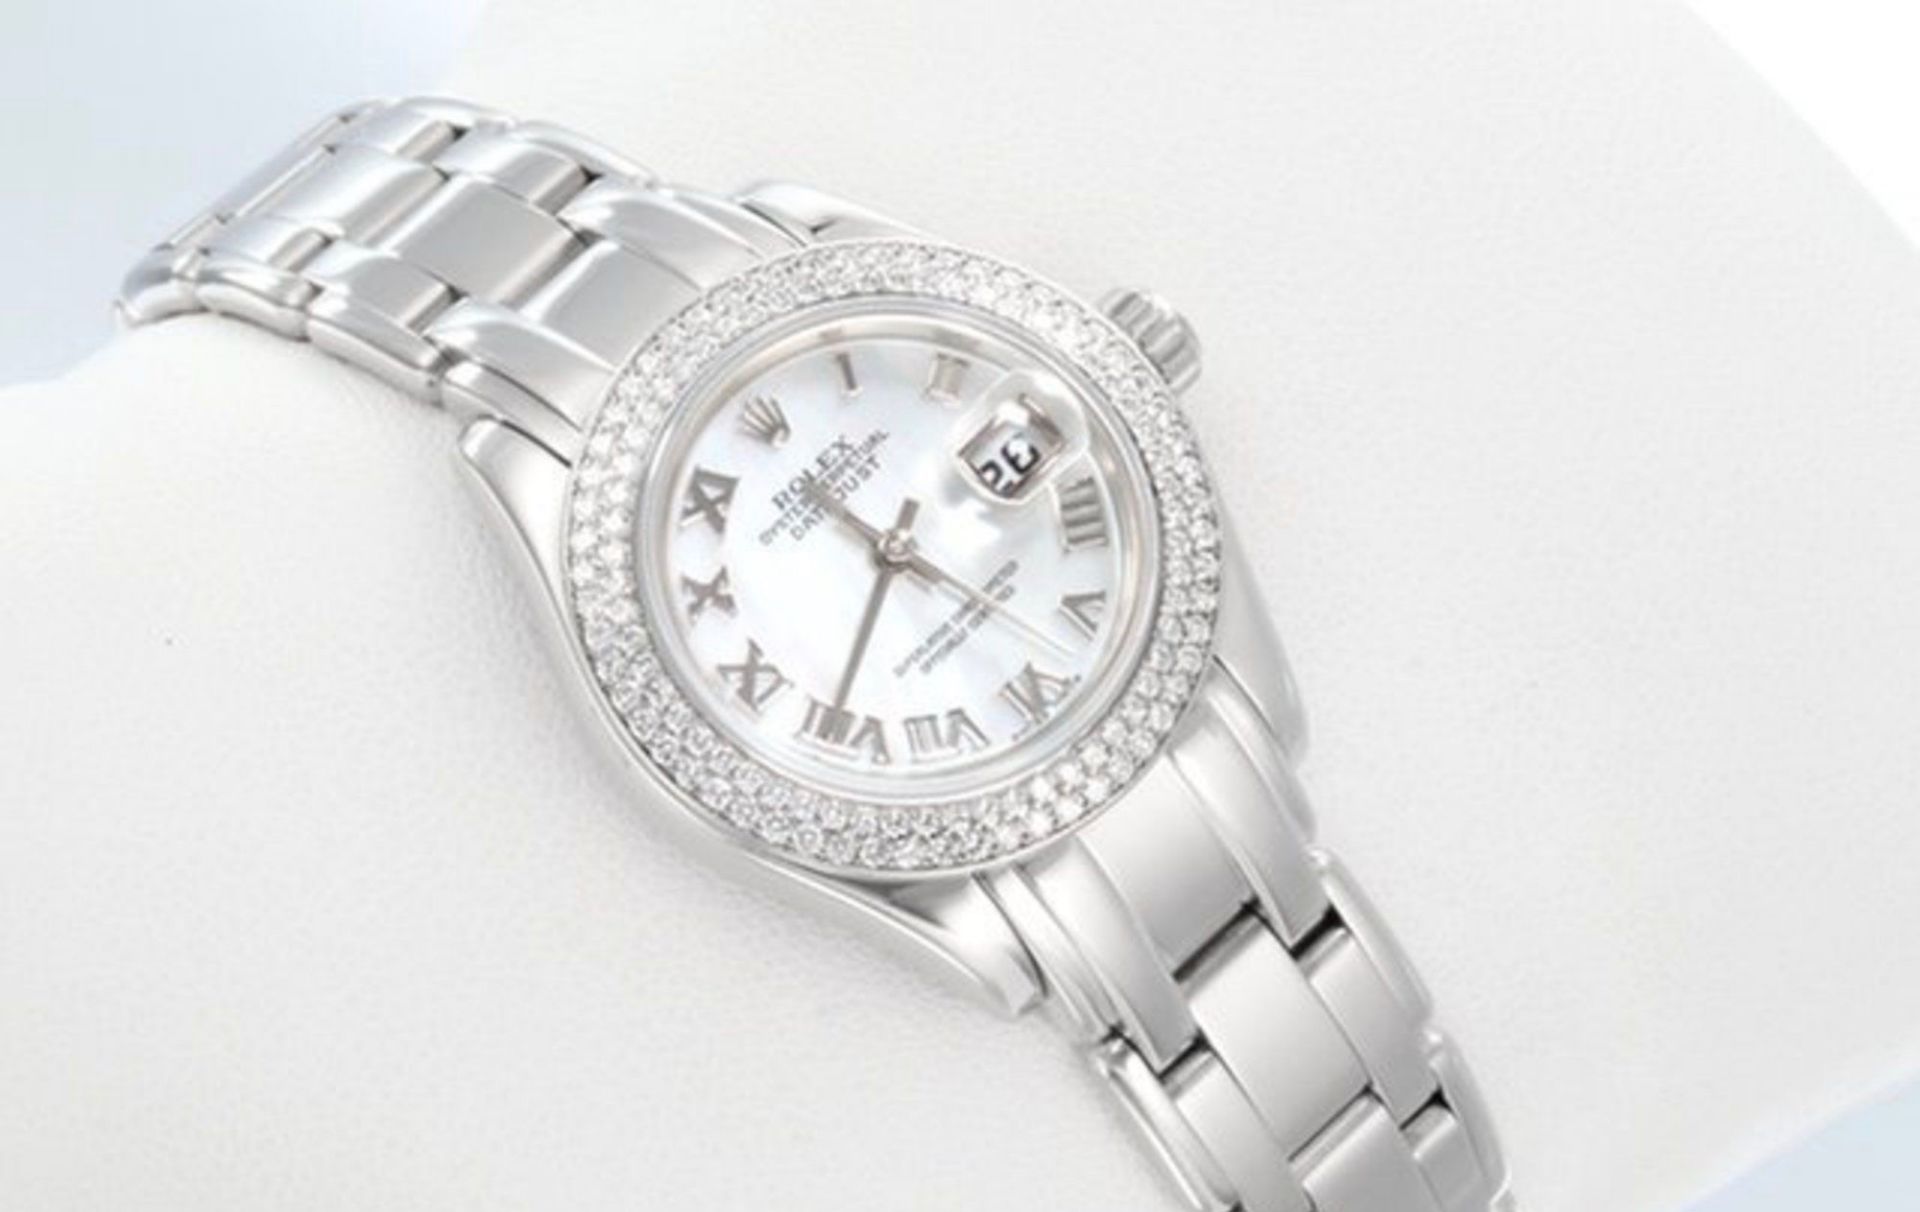 ROLEX PEARLMASTER "WHITE GOLD" (80339) MOTHER OF PEARL FACE - DOUBLE DIAMOND BEZEL - OYSTER BRACELET